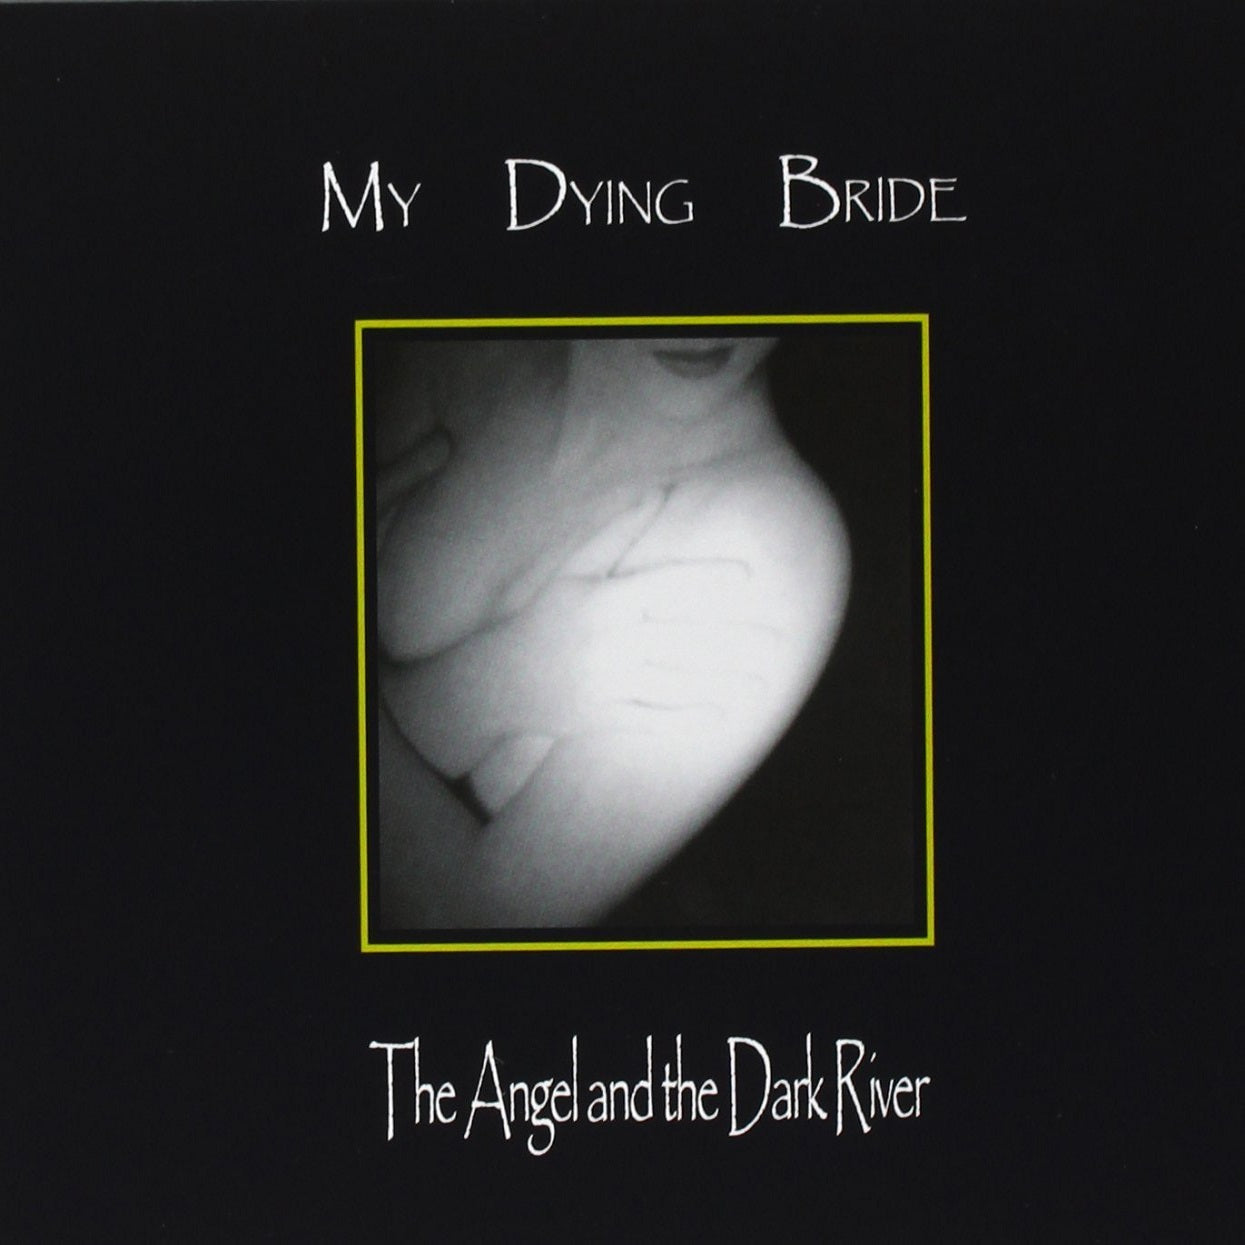 My Dying Bride "The Angel And The Dark River" 2x12" Vinyl